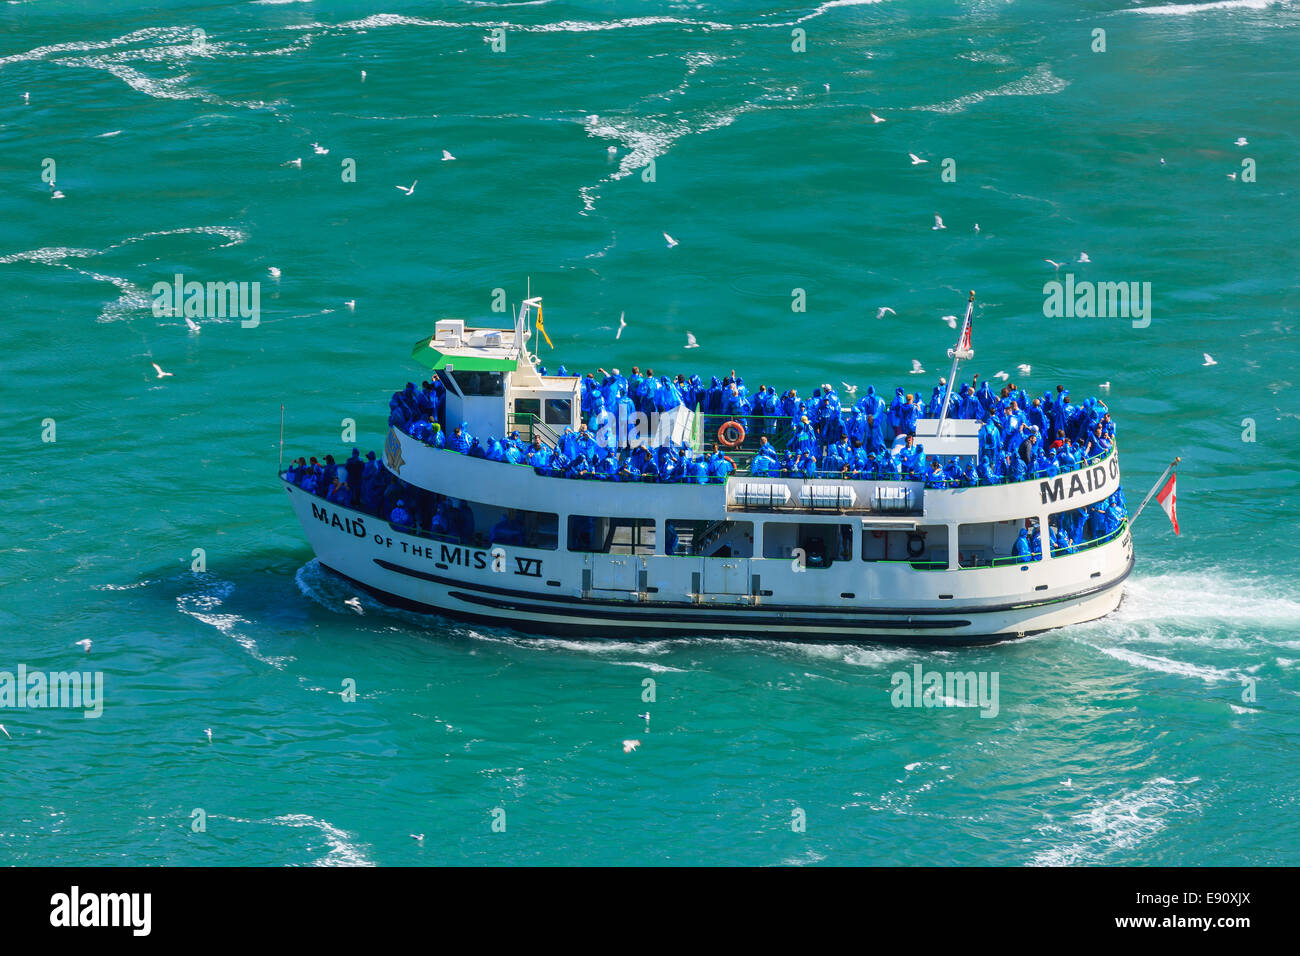 The Maid of the Mist loaded with tourists at the Niagara Falls, Ontario, Canada. Stock Photo